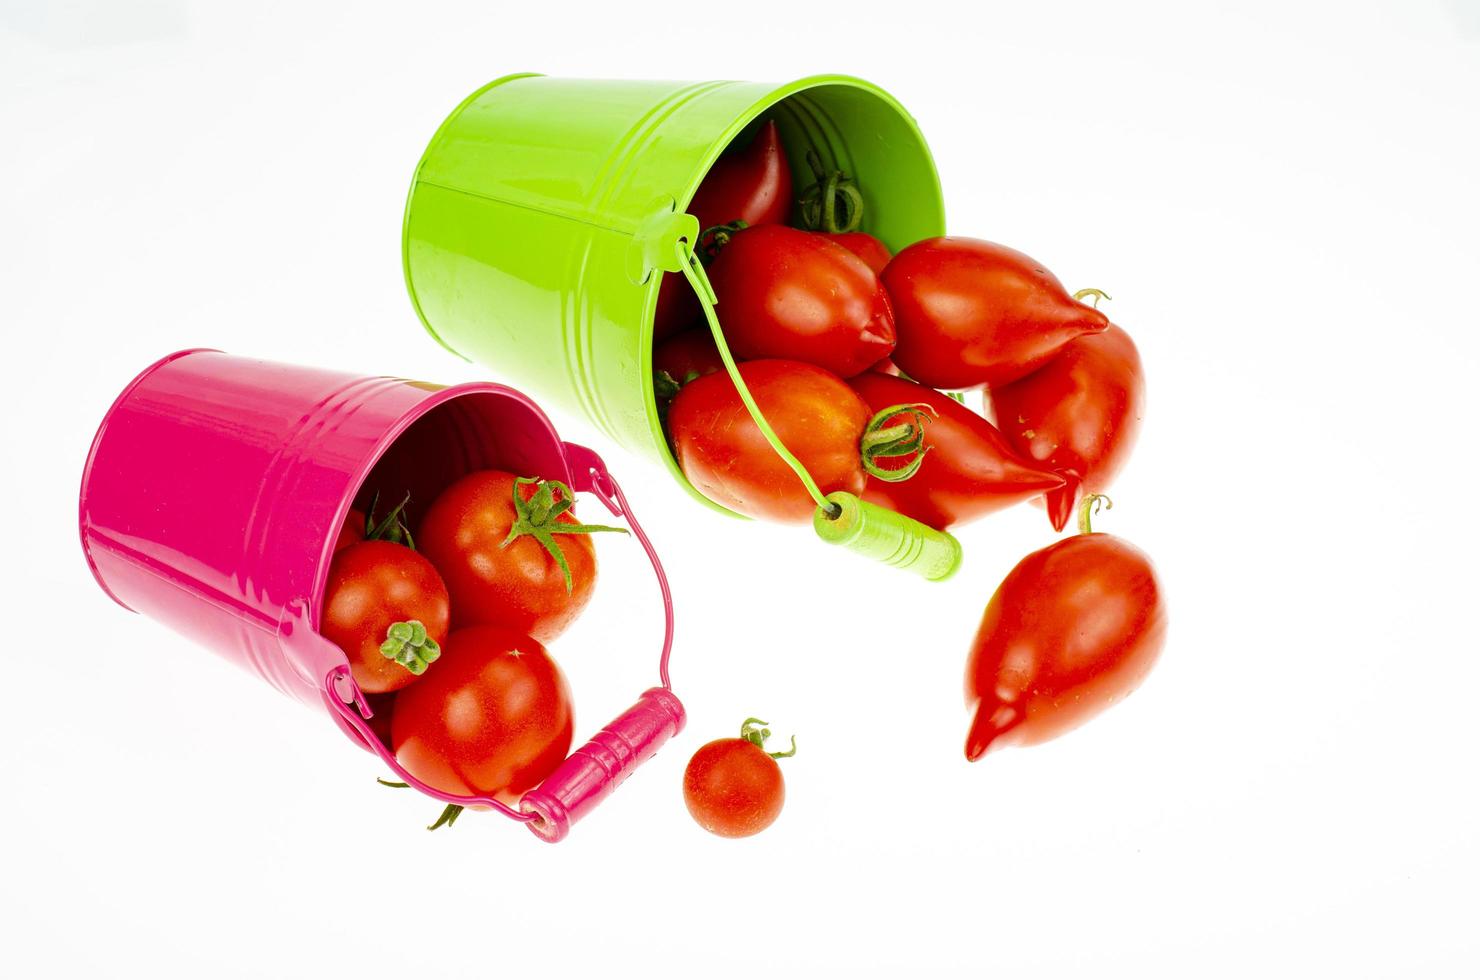 Harvesting. Red ripe tomatoes in colored buckets on white background. Studio Photo. photo